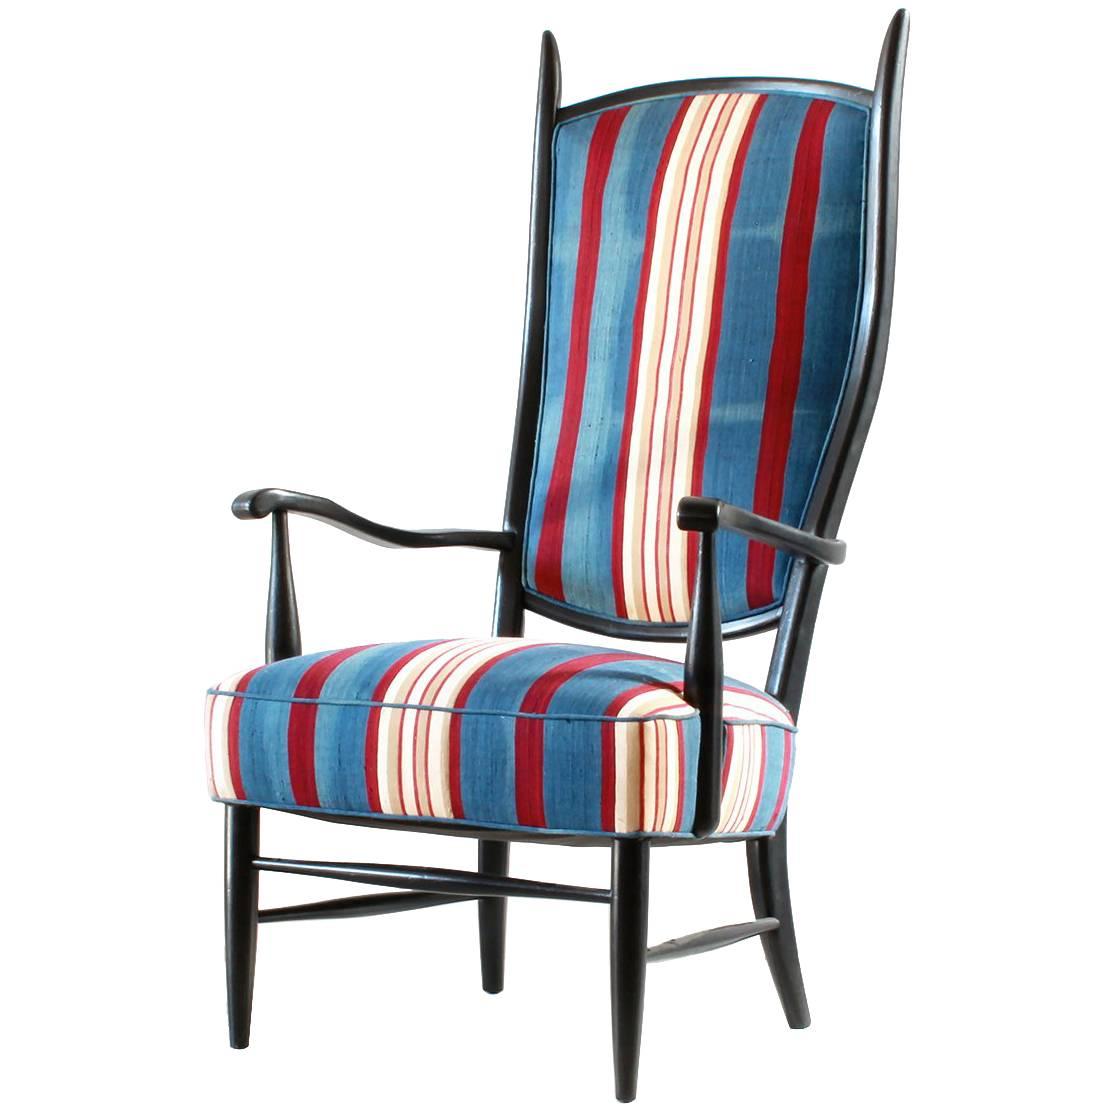 Black Painted Spanish High Back Chair Upholstered in African Fabric